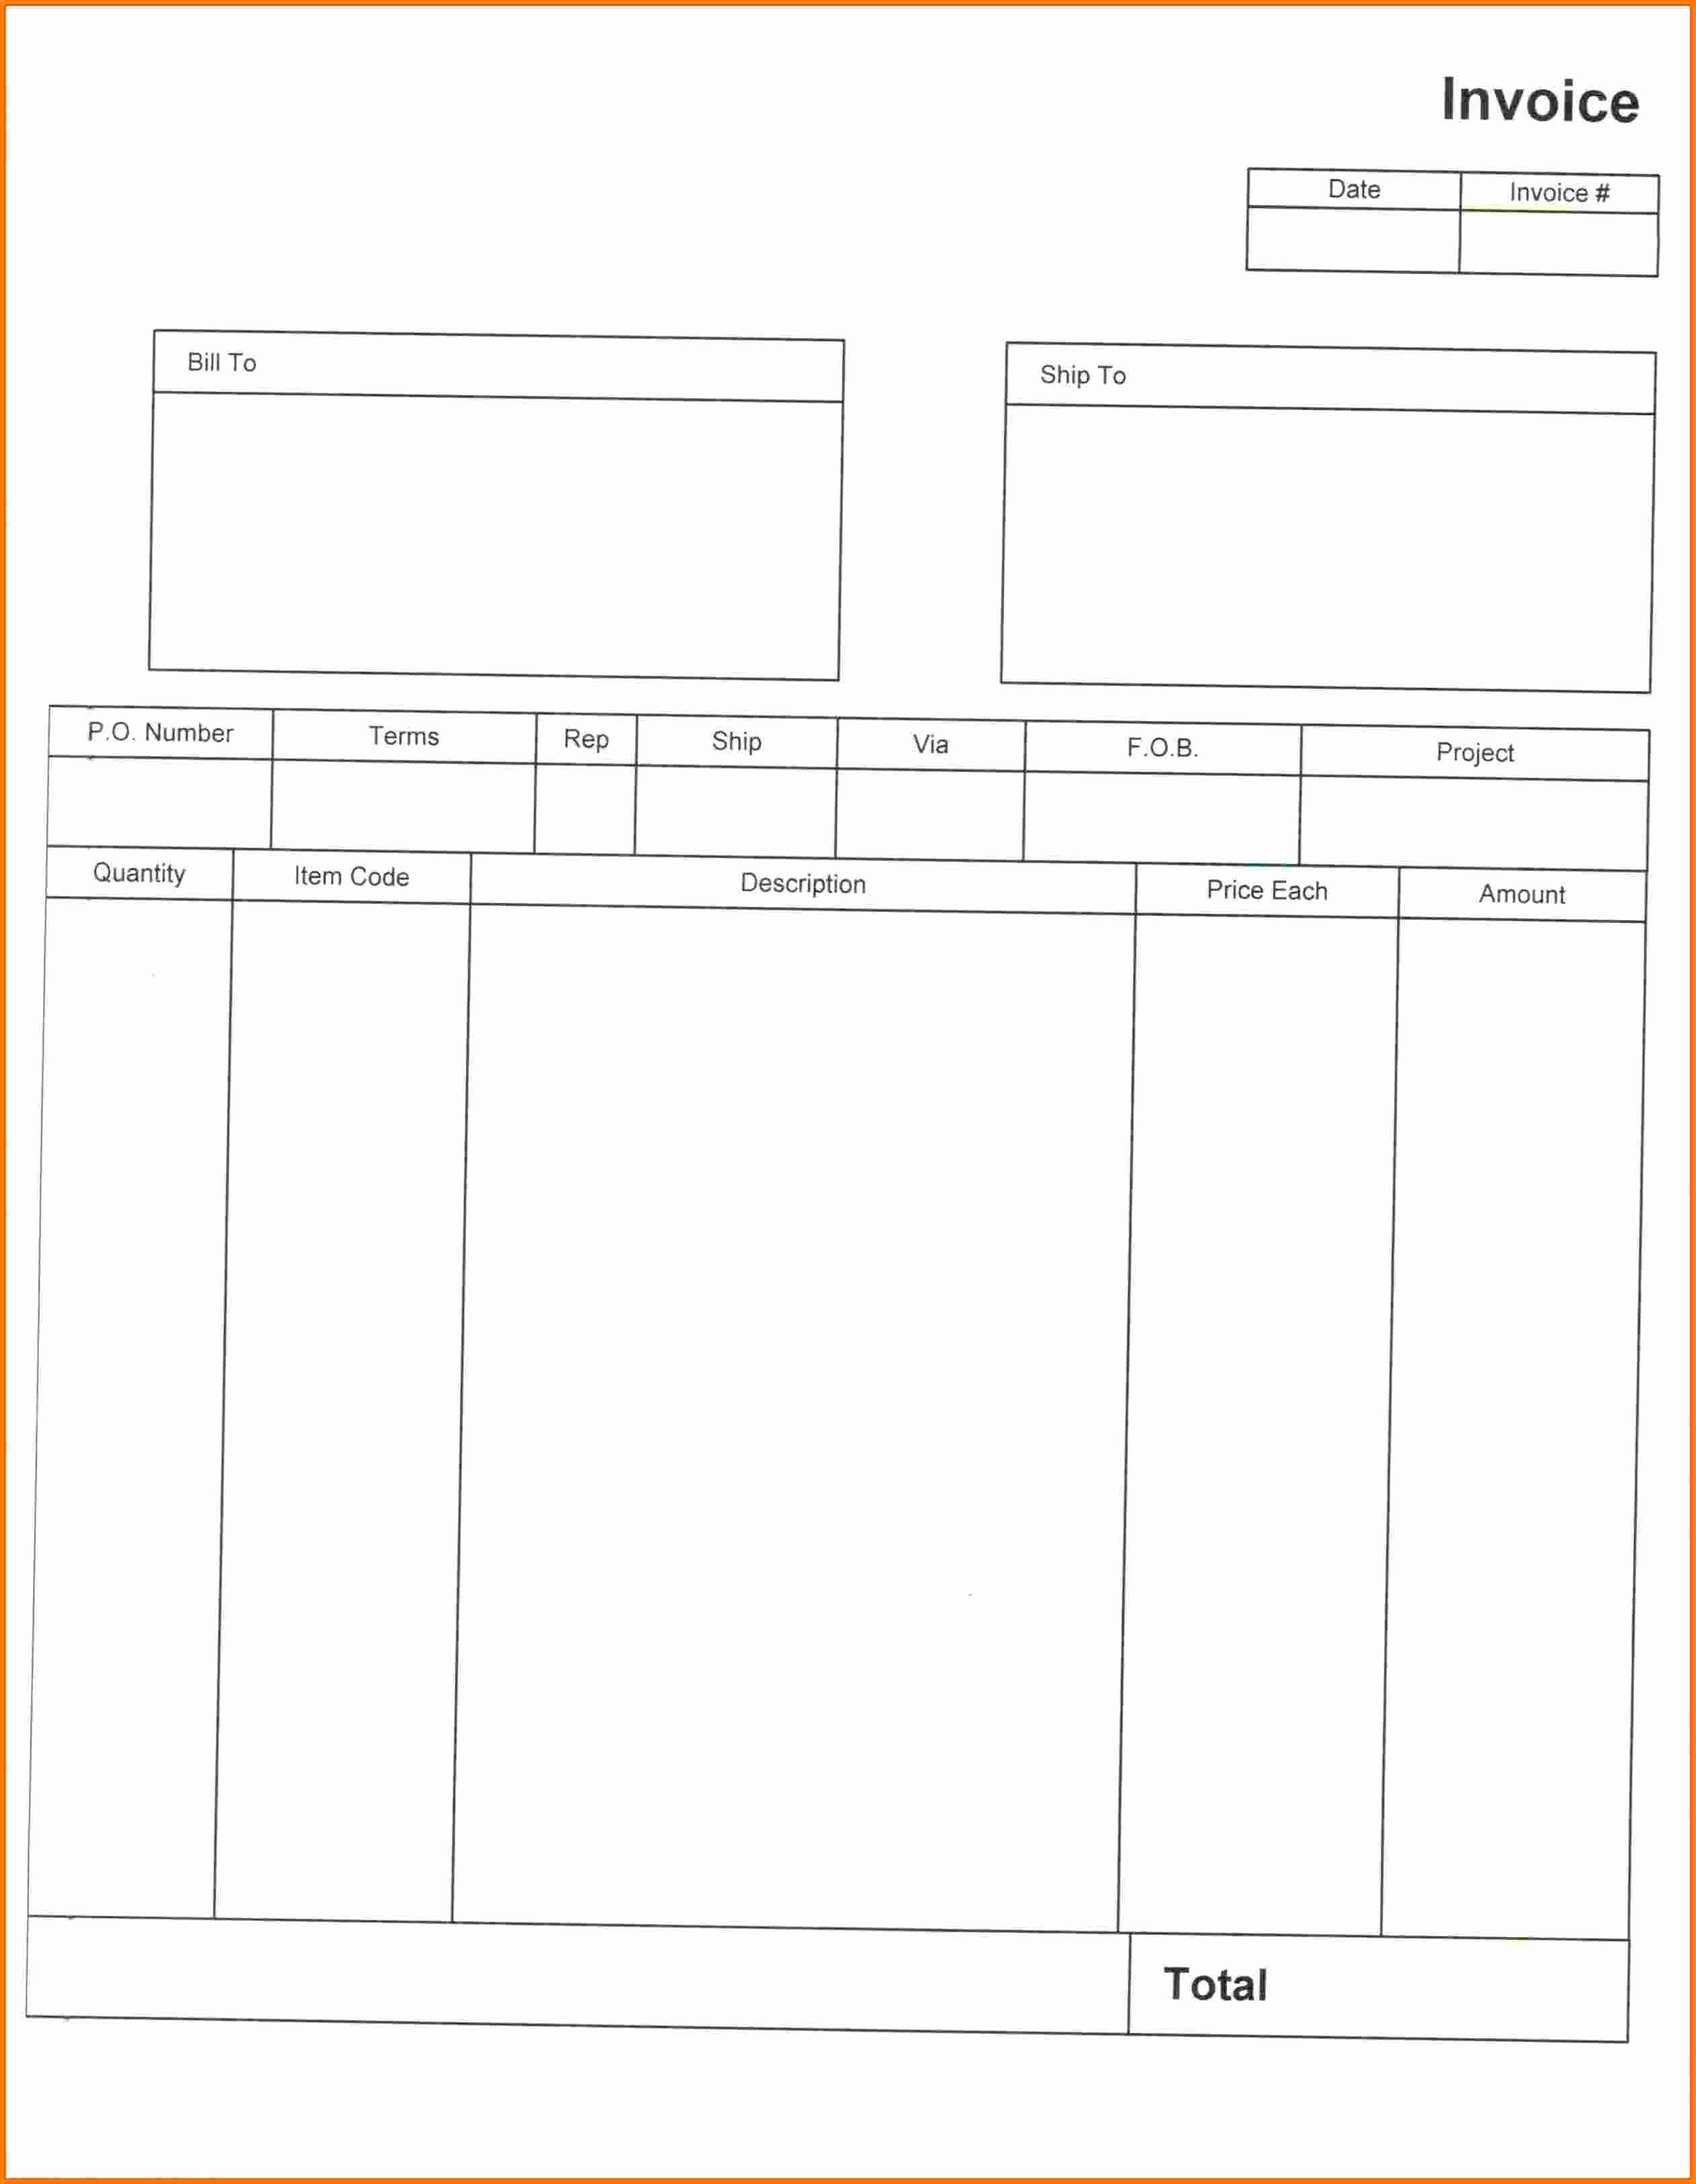 Free Templates for Invoices Printable Beautiful Printable Blank Invoice Printable 360 Degree